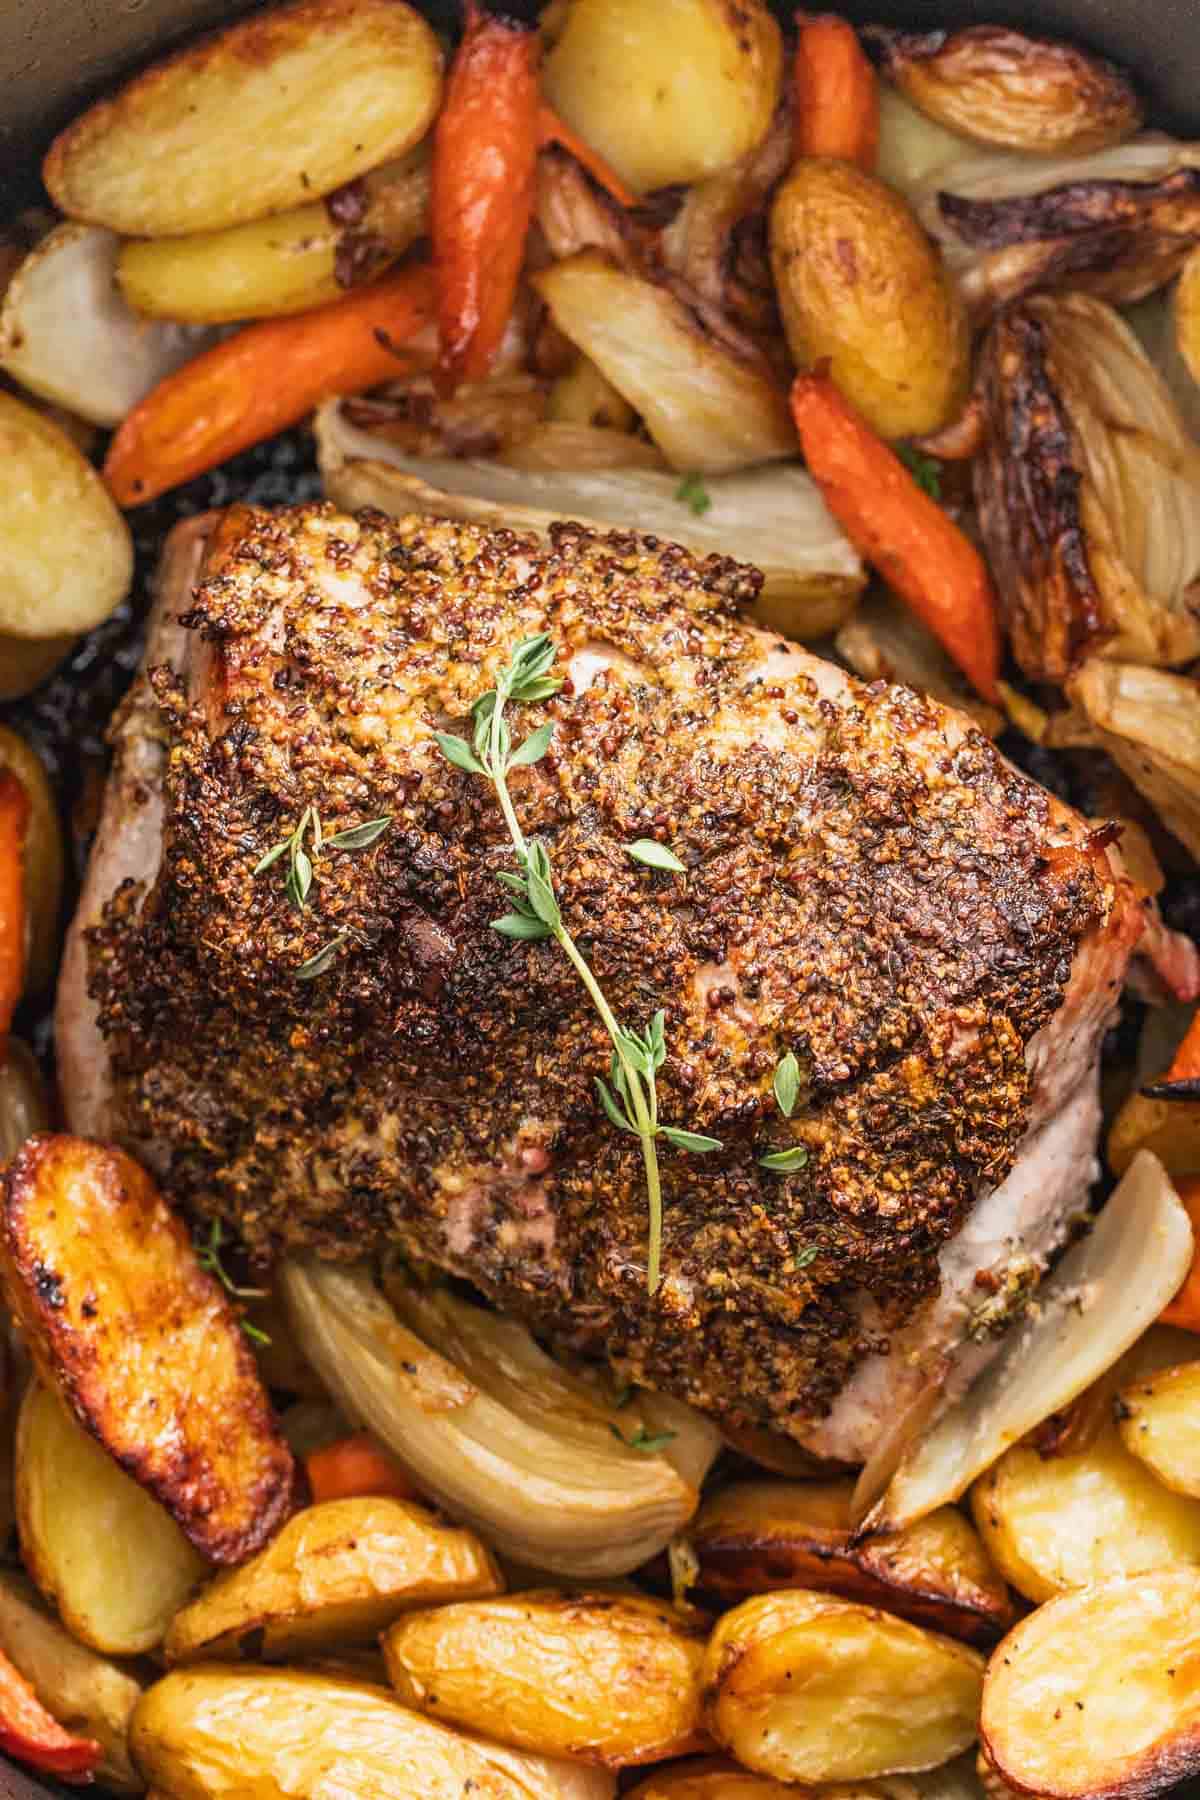 A pork roast topped with a dijon herb crust and thyme.